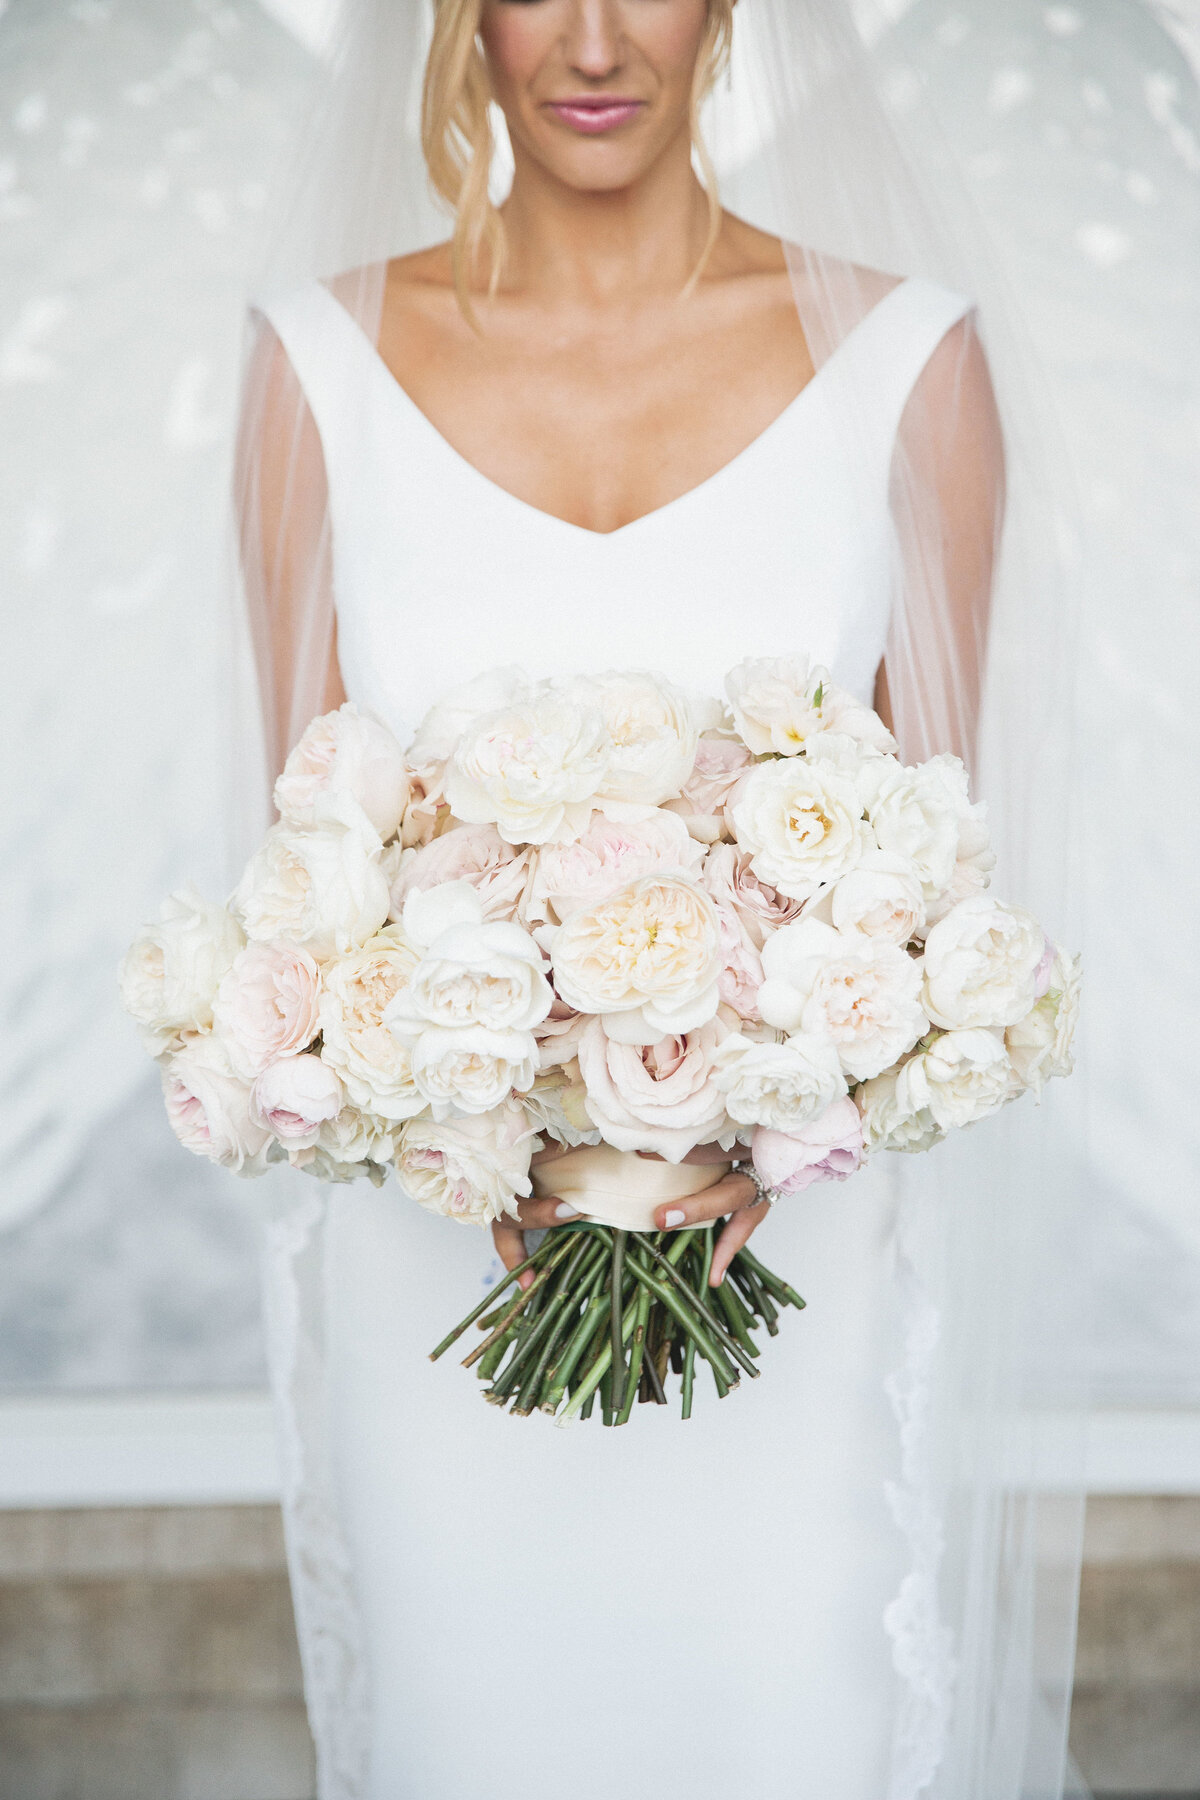 Garden Rose bouquet from The Bachelor's Whitney Bischoff's wedding planned by Best of Boston wedding event planner Always Yours Events